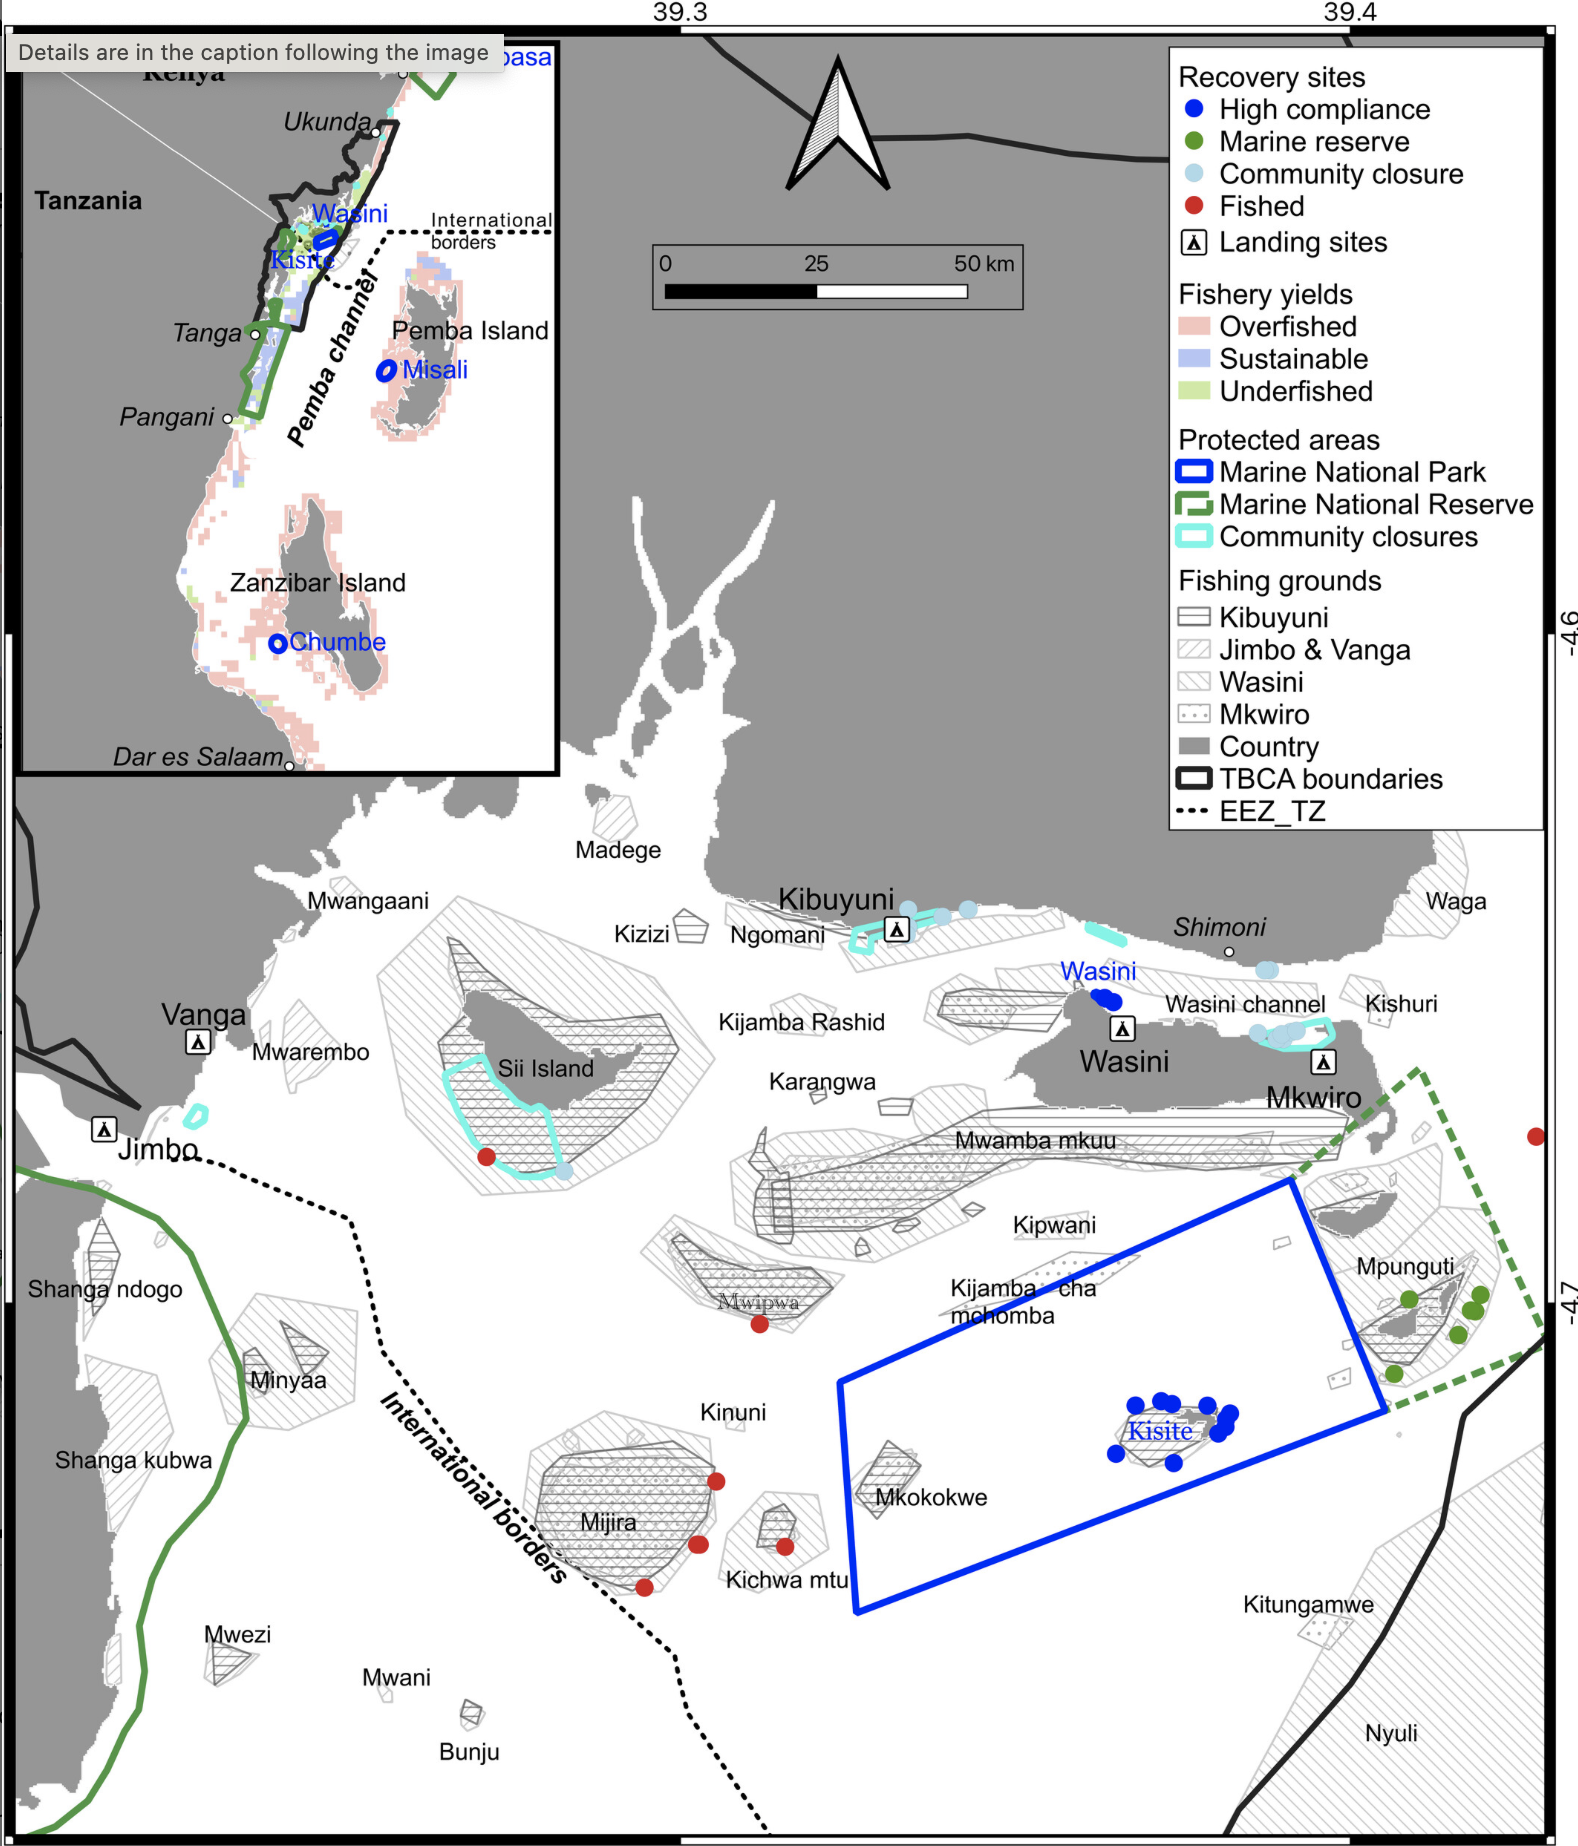 Map showing location of fishing communities and their fishing grounds used to estimate stocks, yields, and fishing areas by management systems. Inset shows locations of various fisheries closures used to estimate fish stocks and recovery rates in the southern Kenya–Northern Tanzanian region.